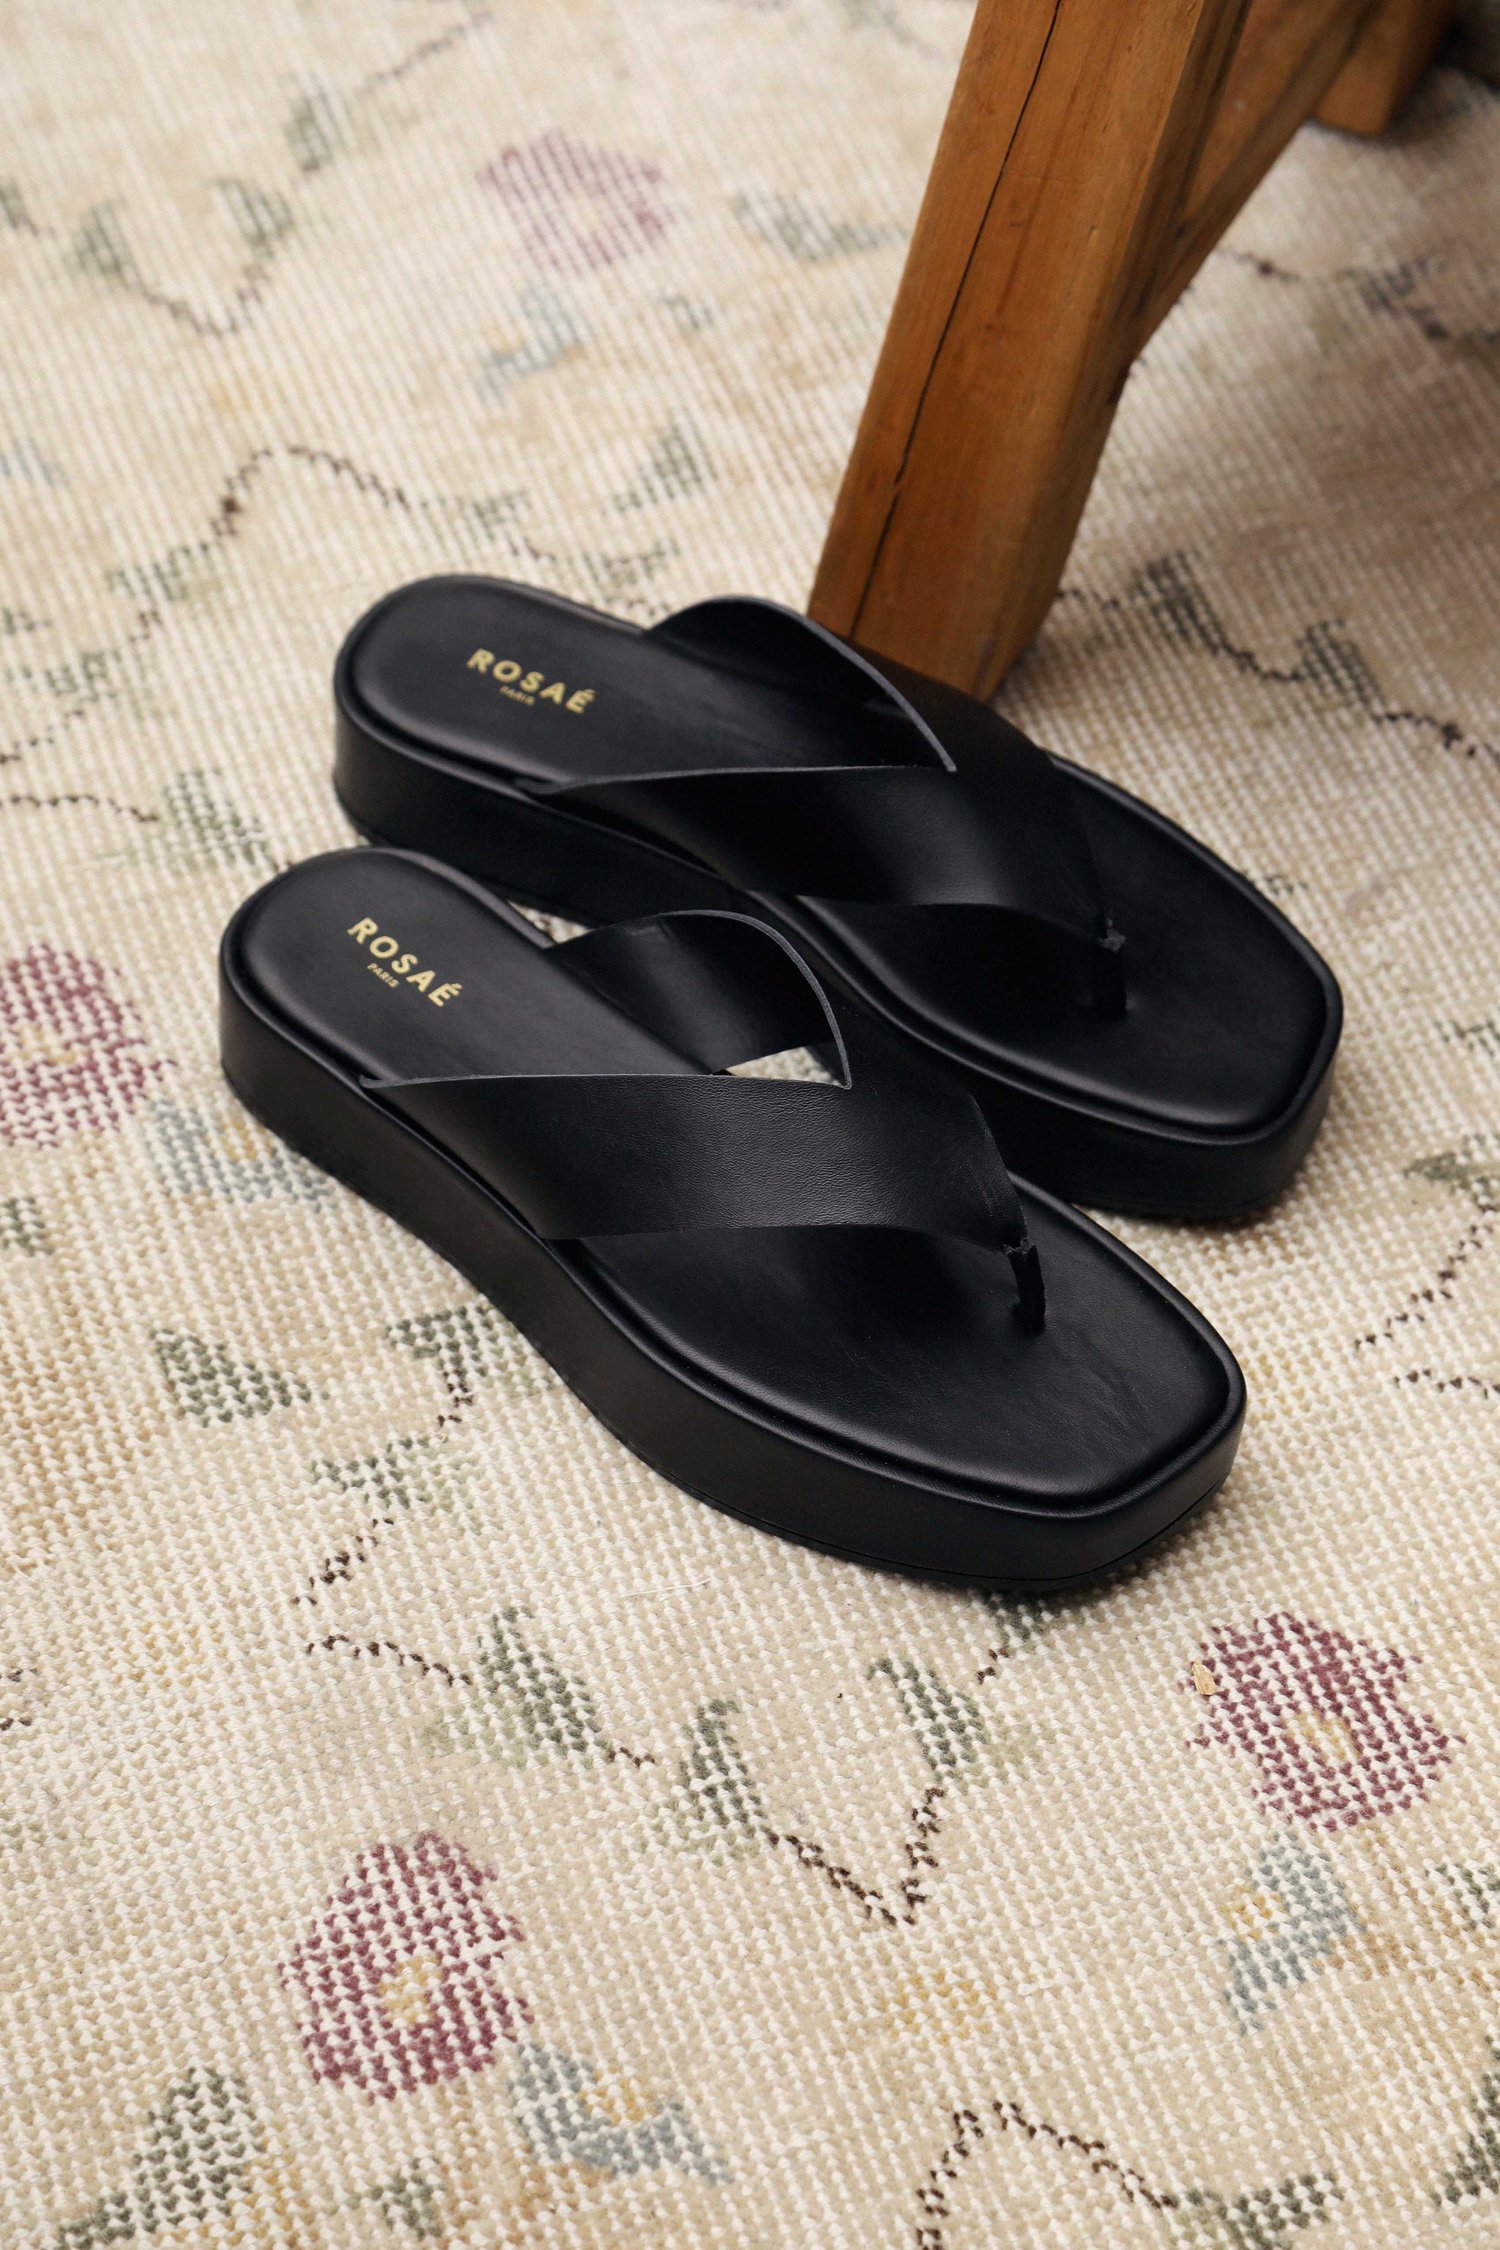 Les Isidore - The Leather Chunky Plateform Flip Flops with So Much Flair — Rosae Paris